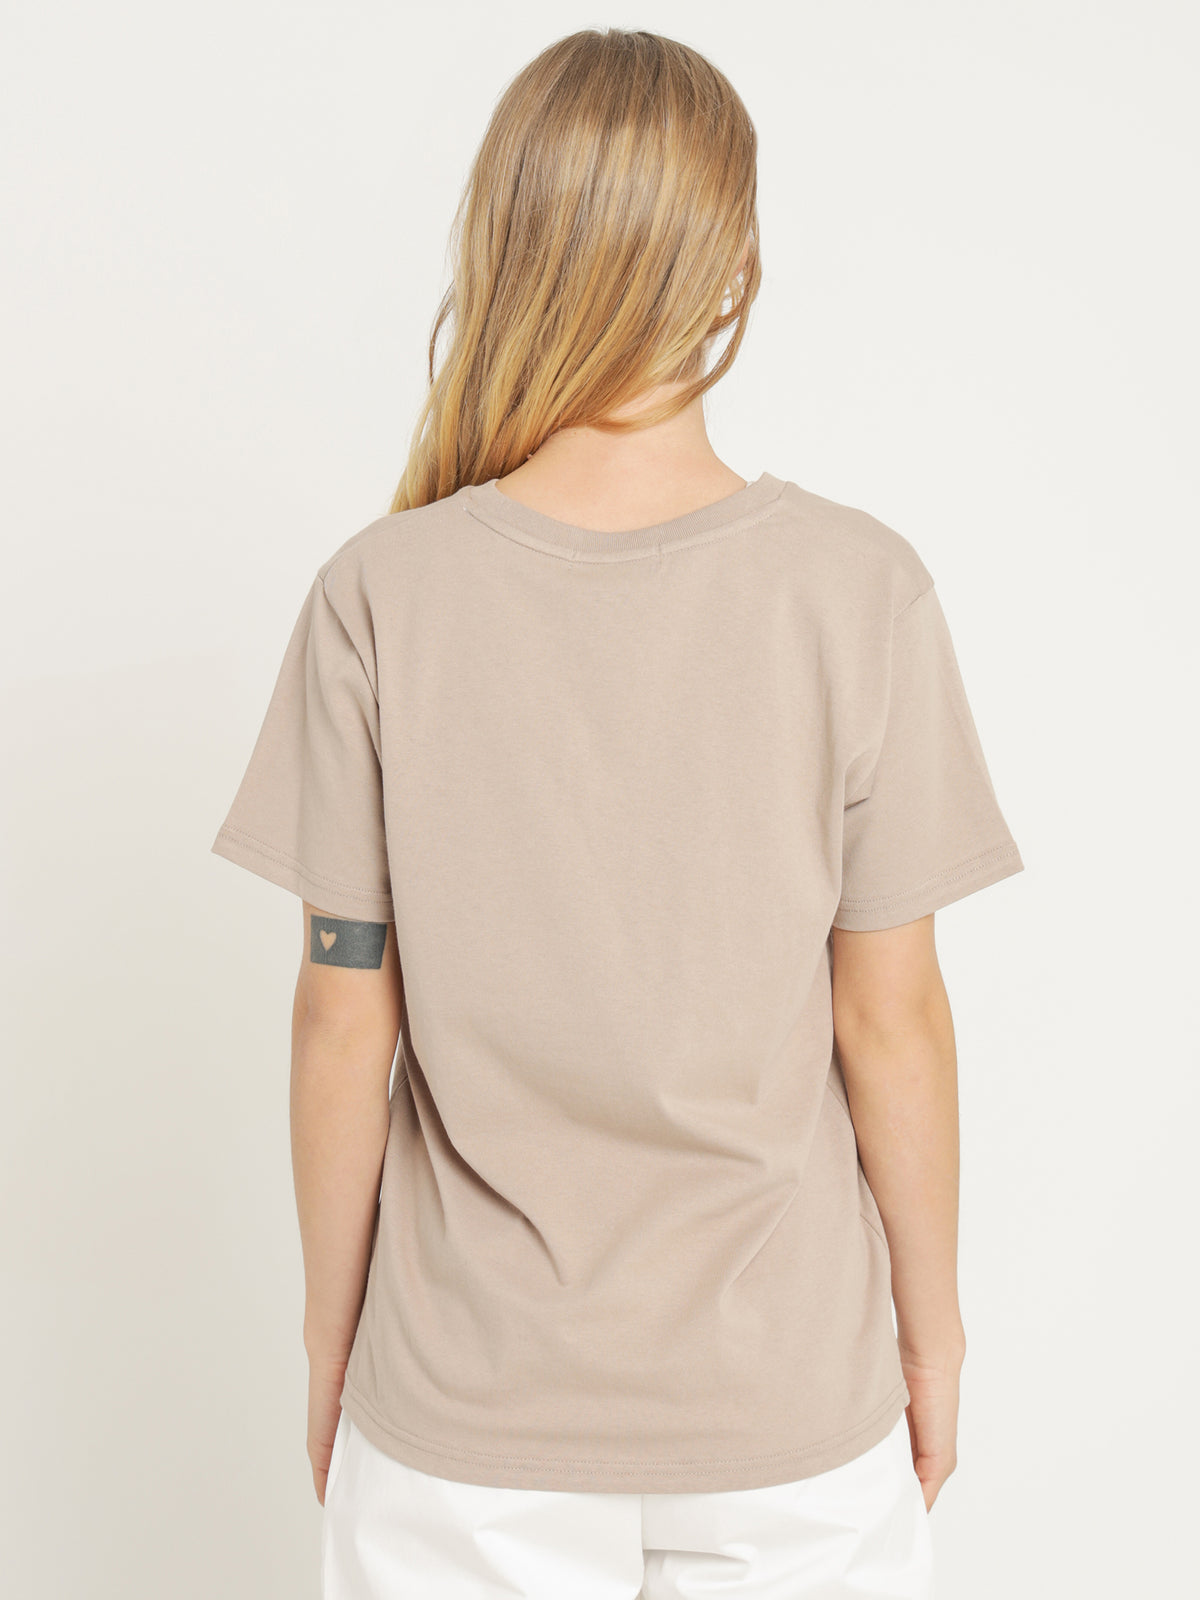 Nude T-Shirt in Mink